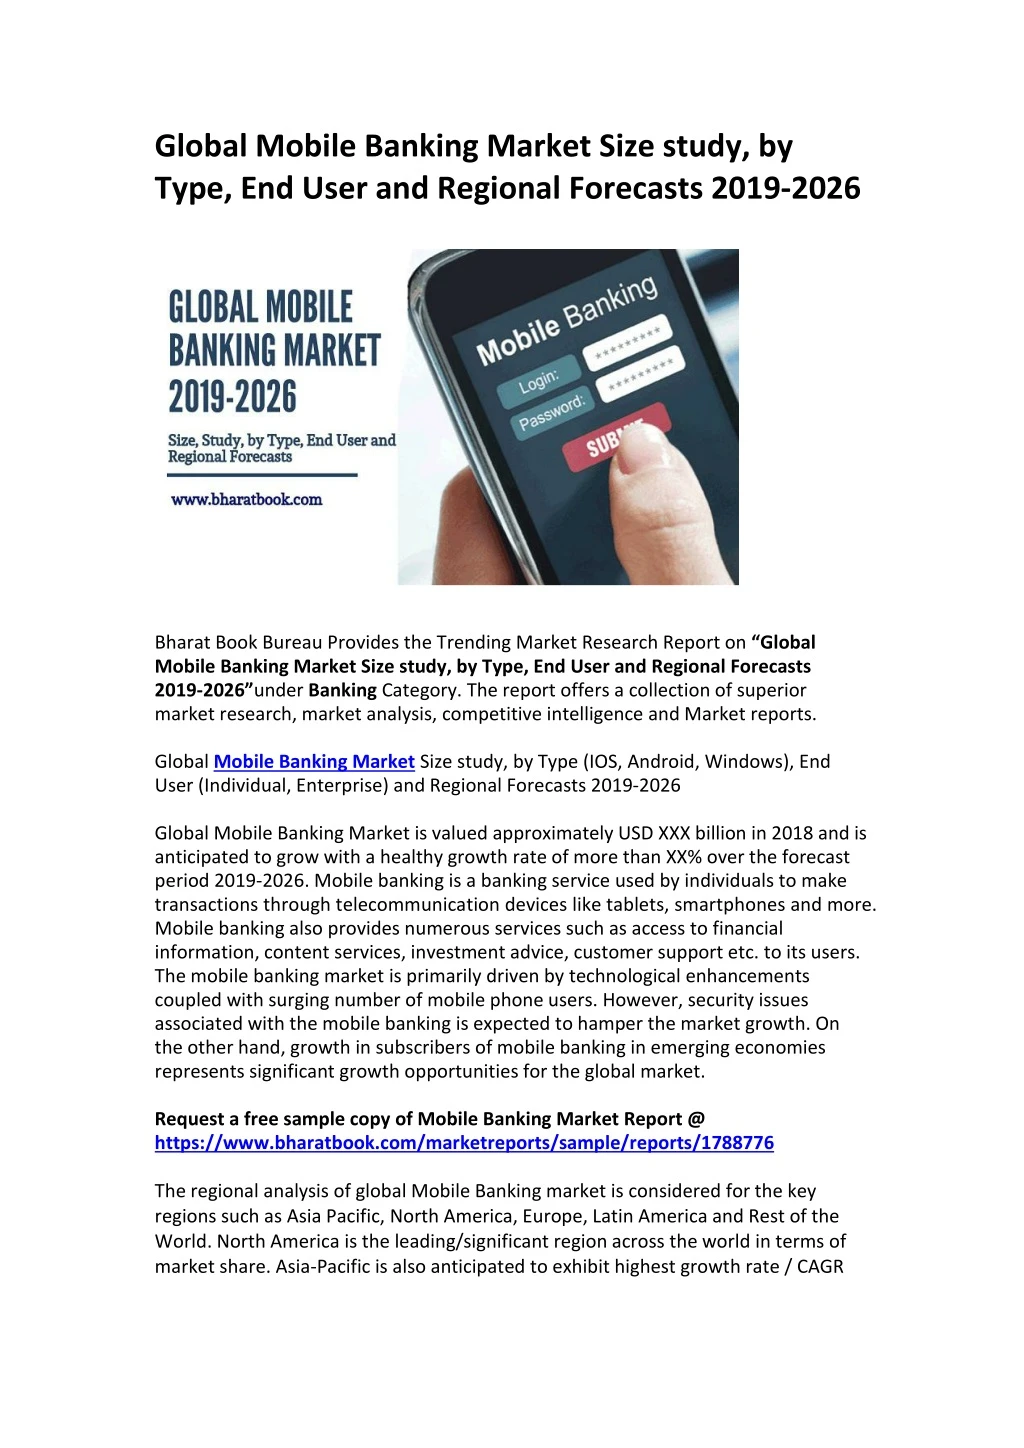 global mobile banking market size study by type